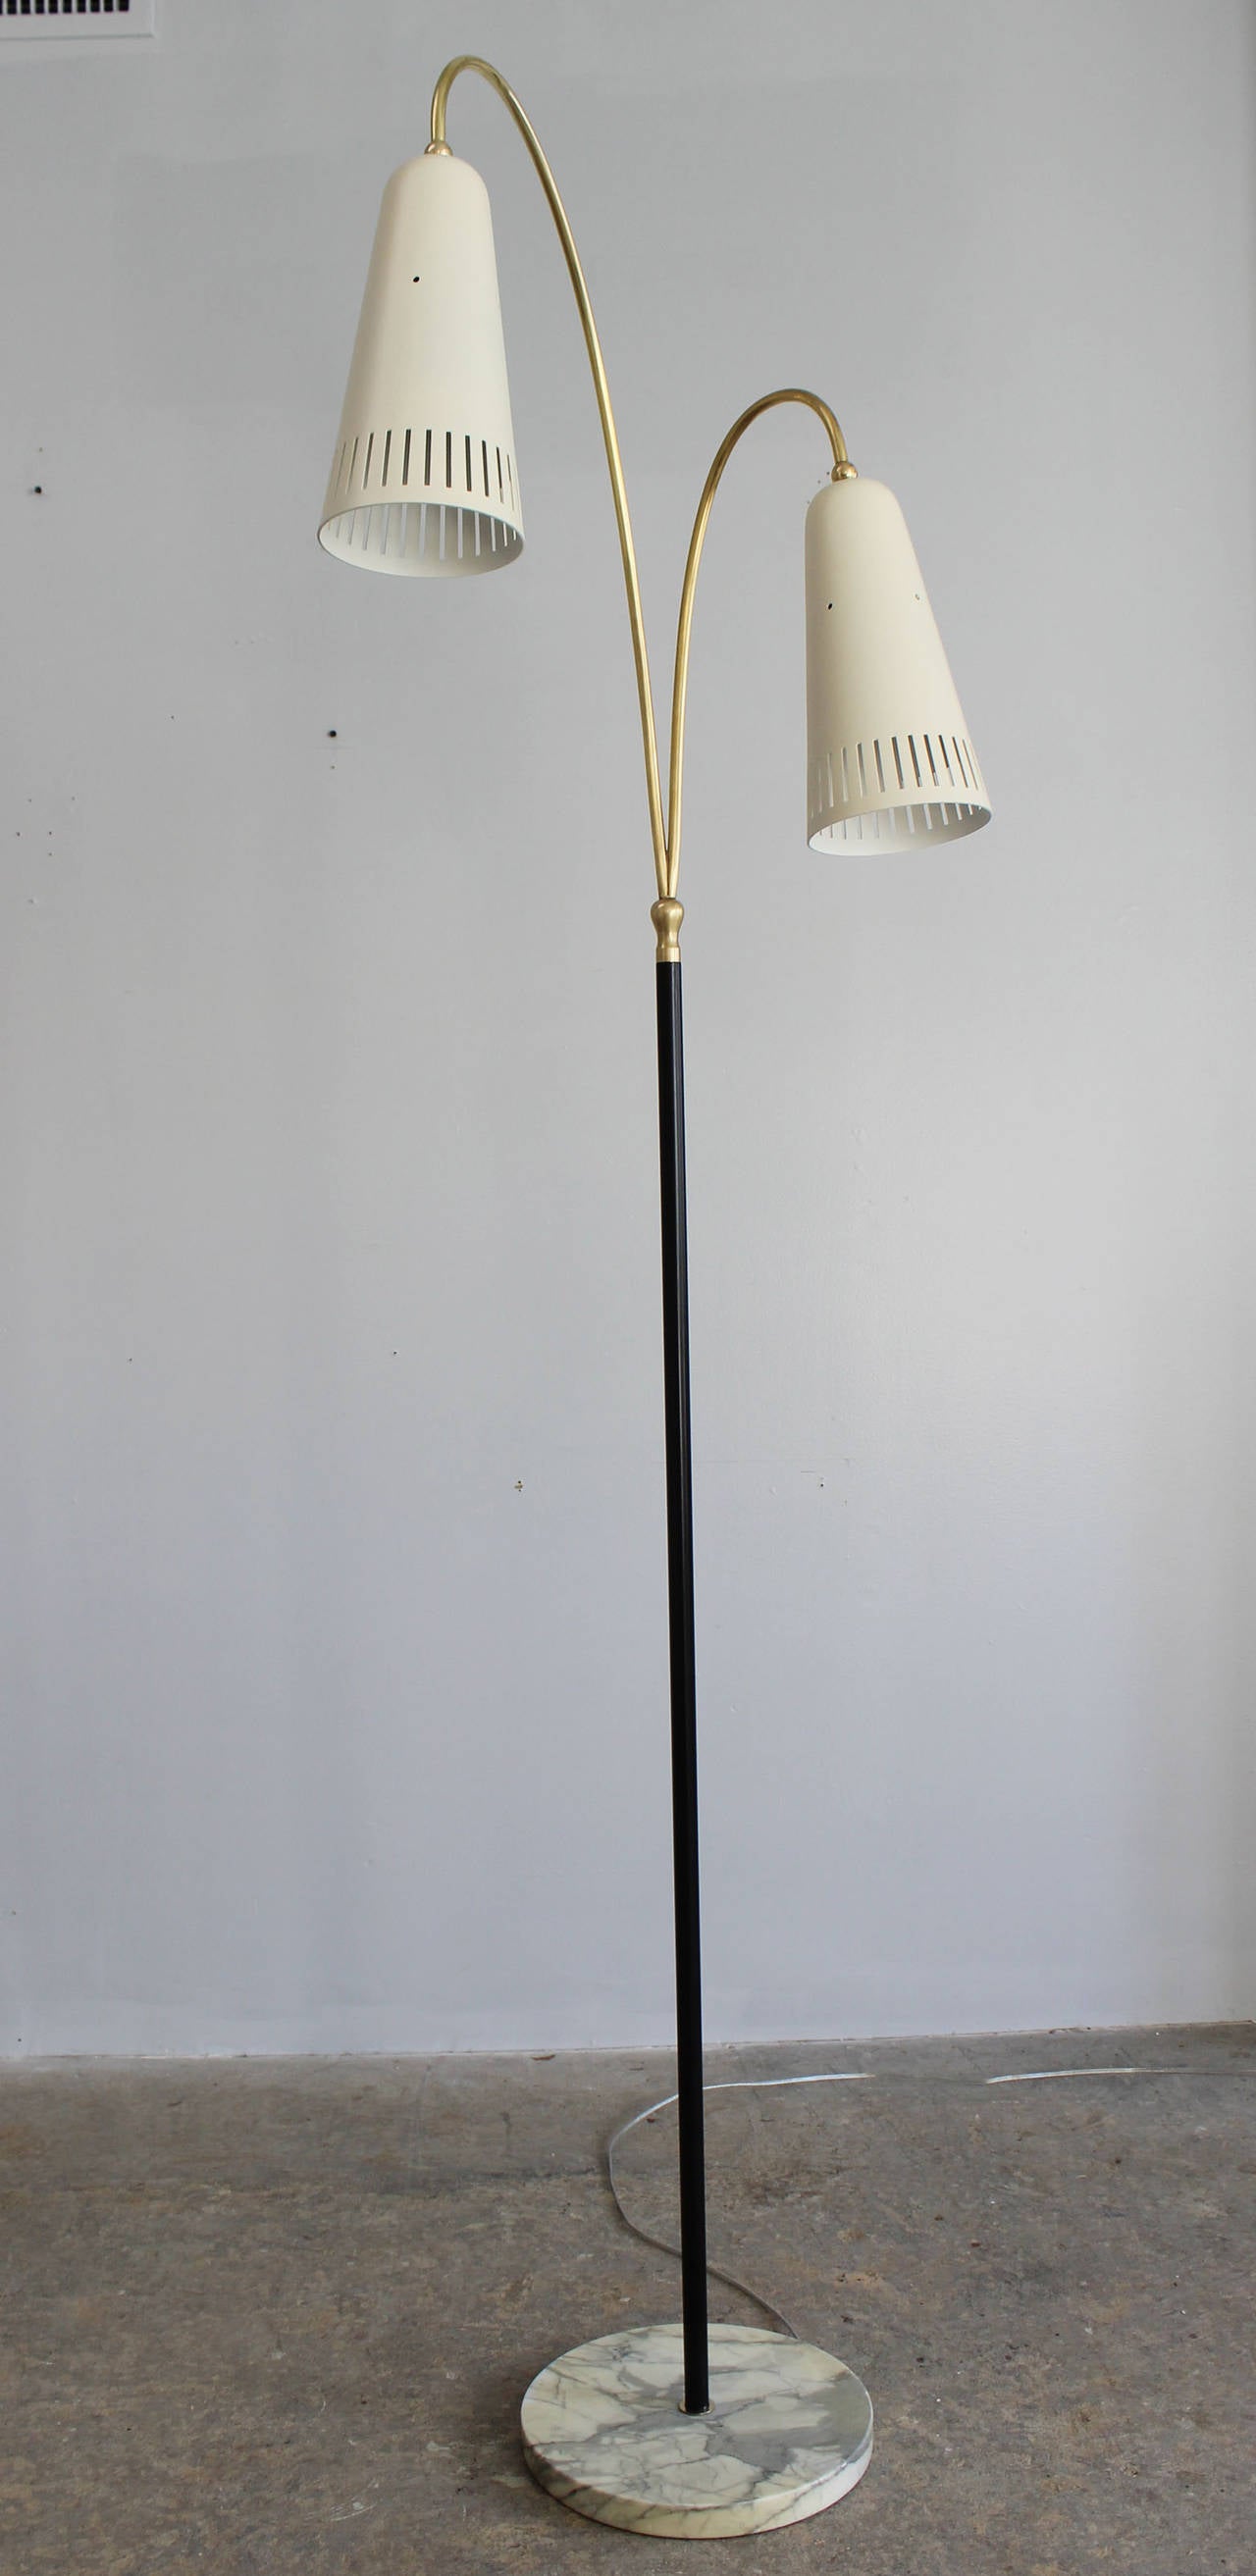 Charming polished brass and enameled metal floor lamp with marble base, attributed to Arredoluce; restored and rewired.